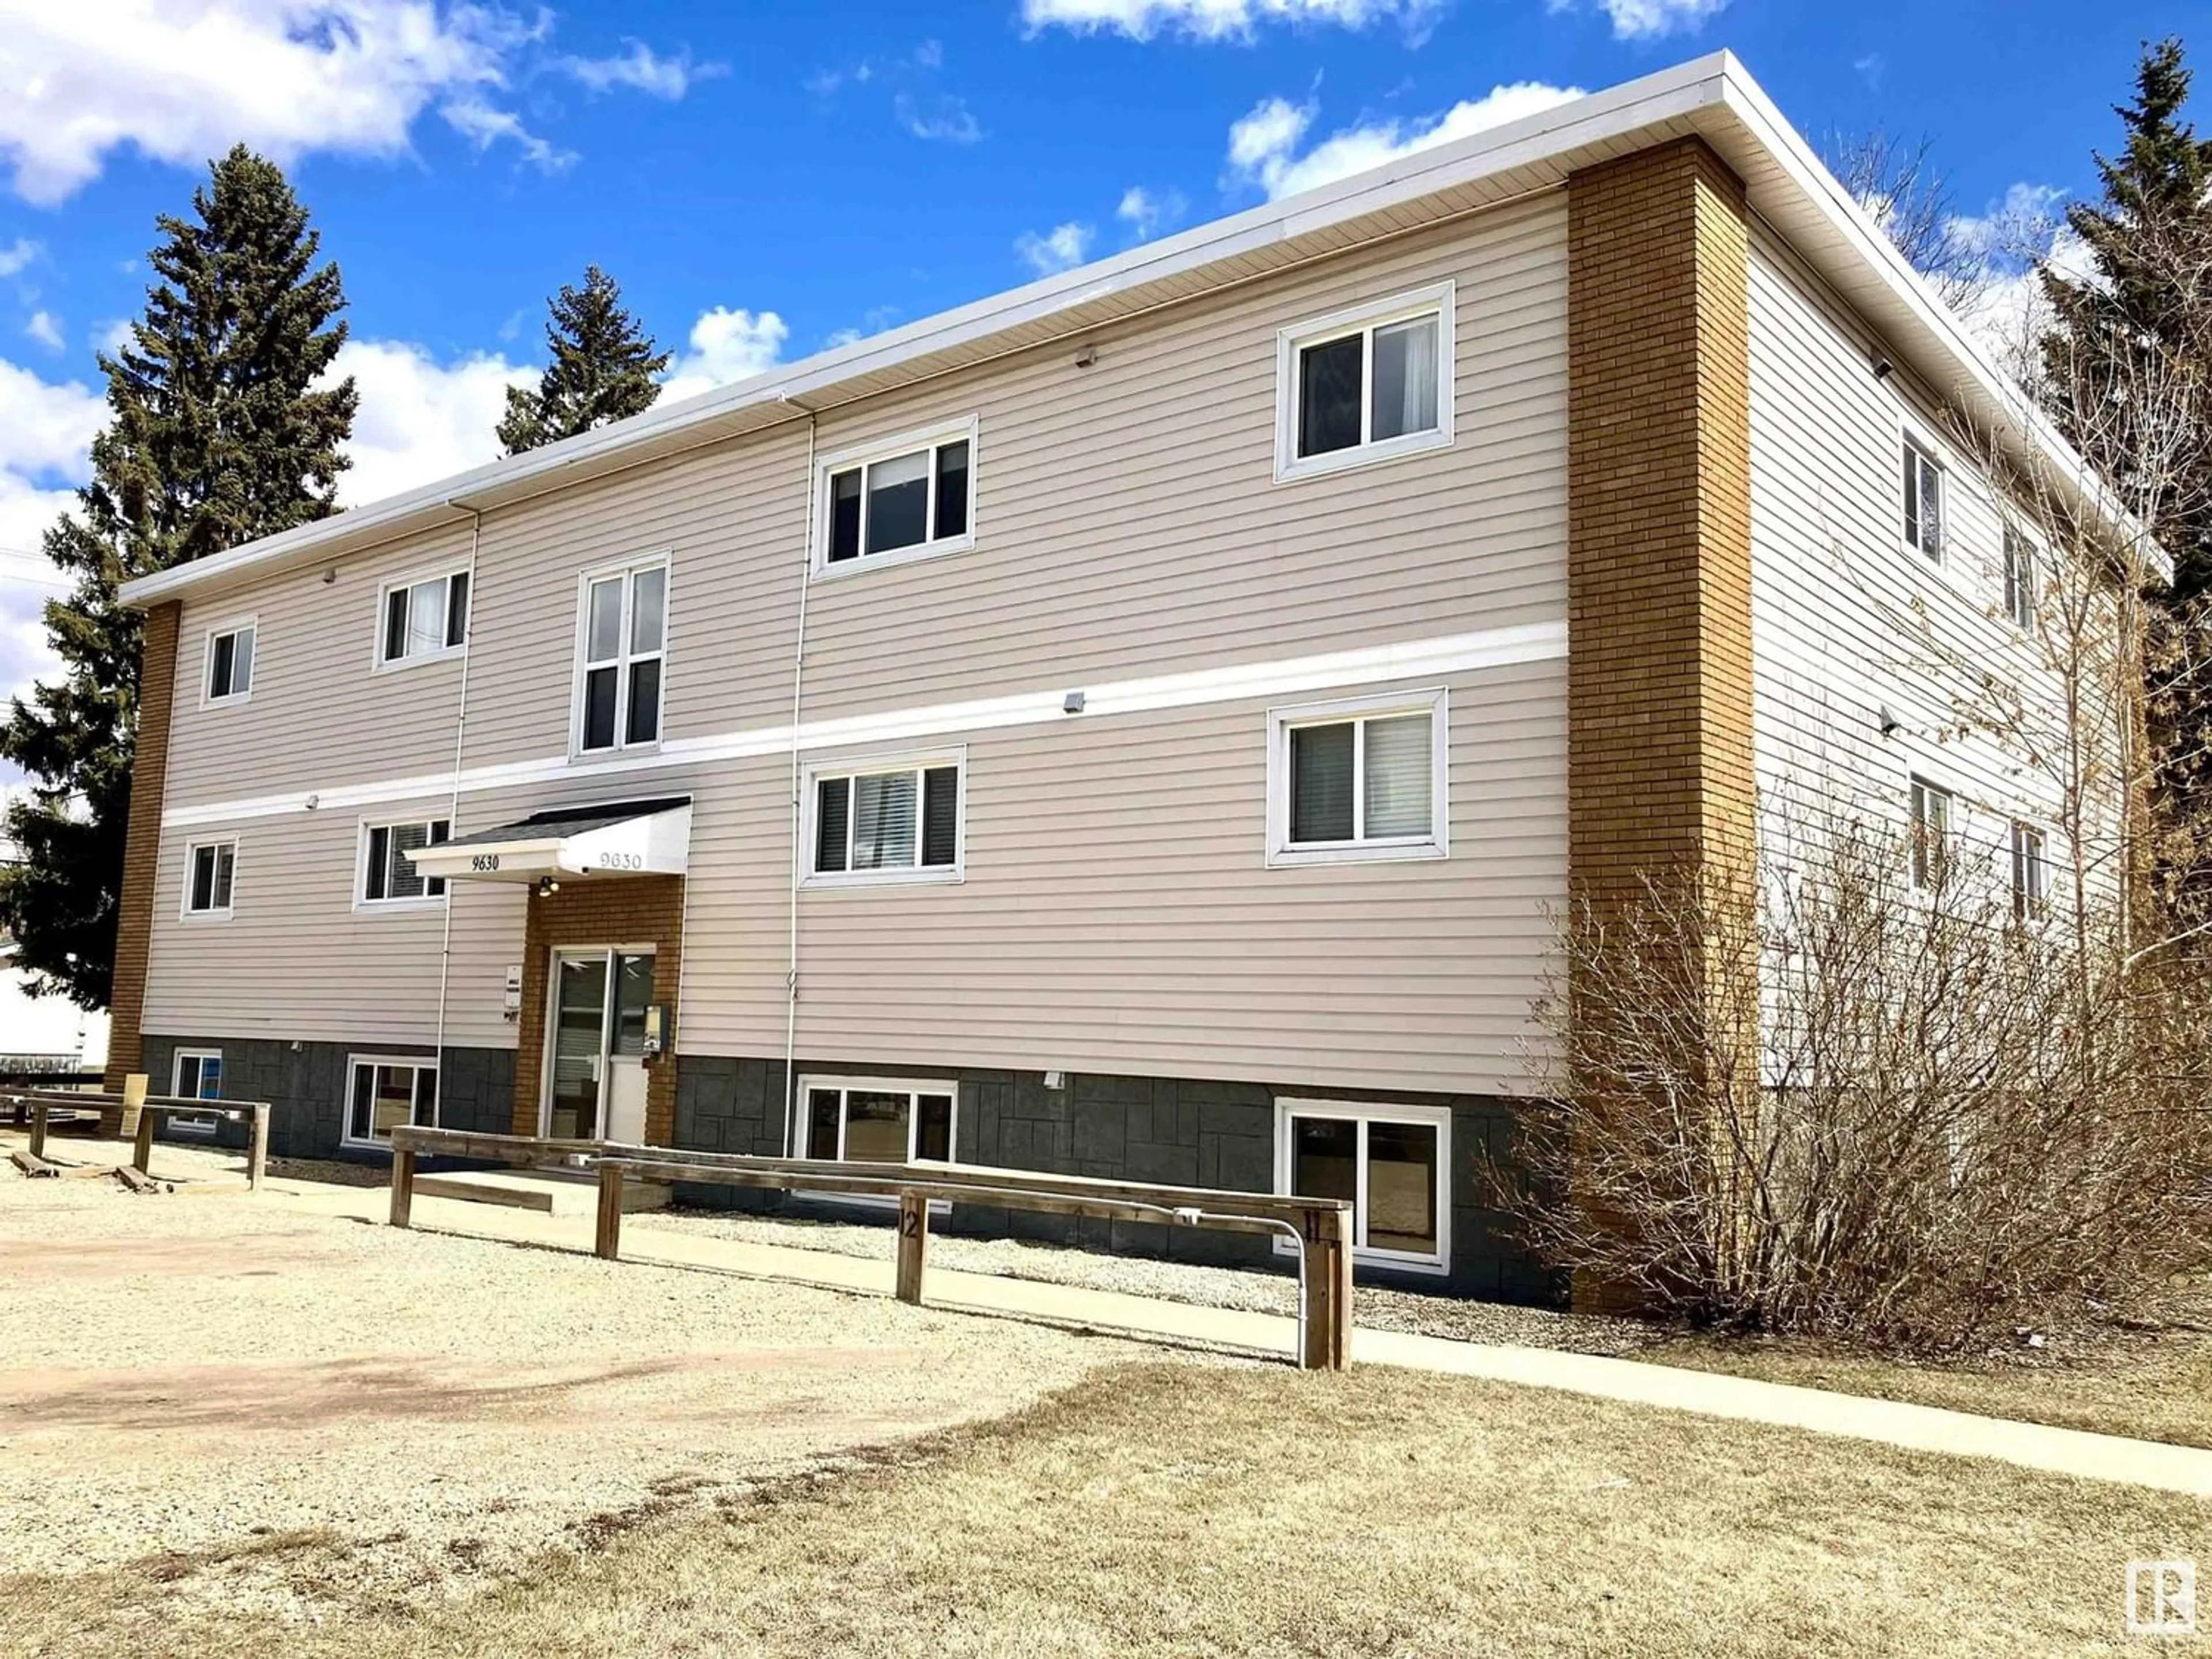 A pic from exterior of the house or condo for #2 9630 82 AV NW, Edmonton Alberta T6C1A1